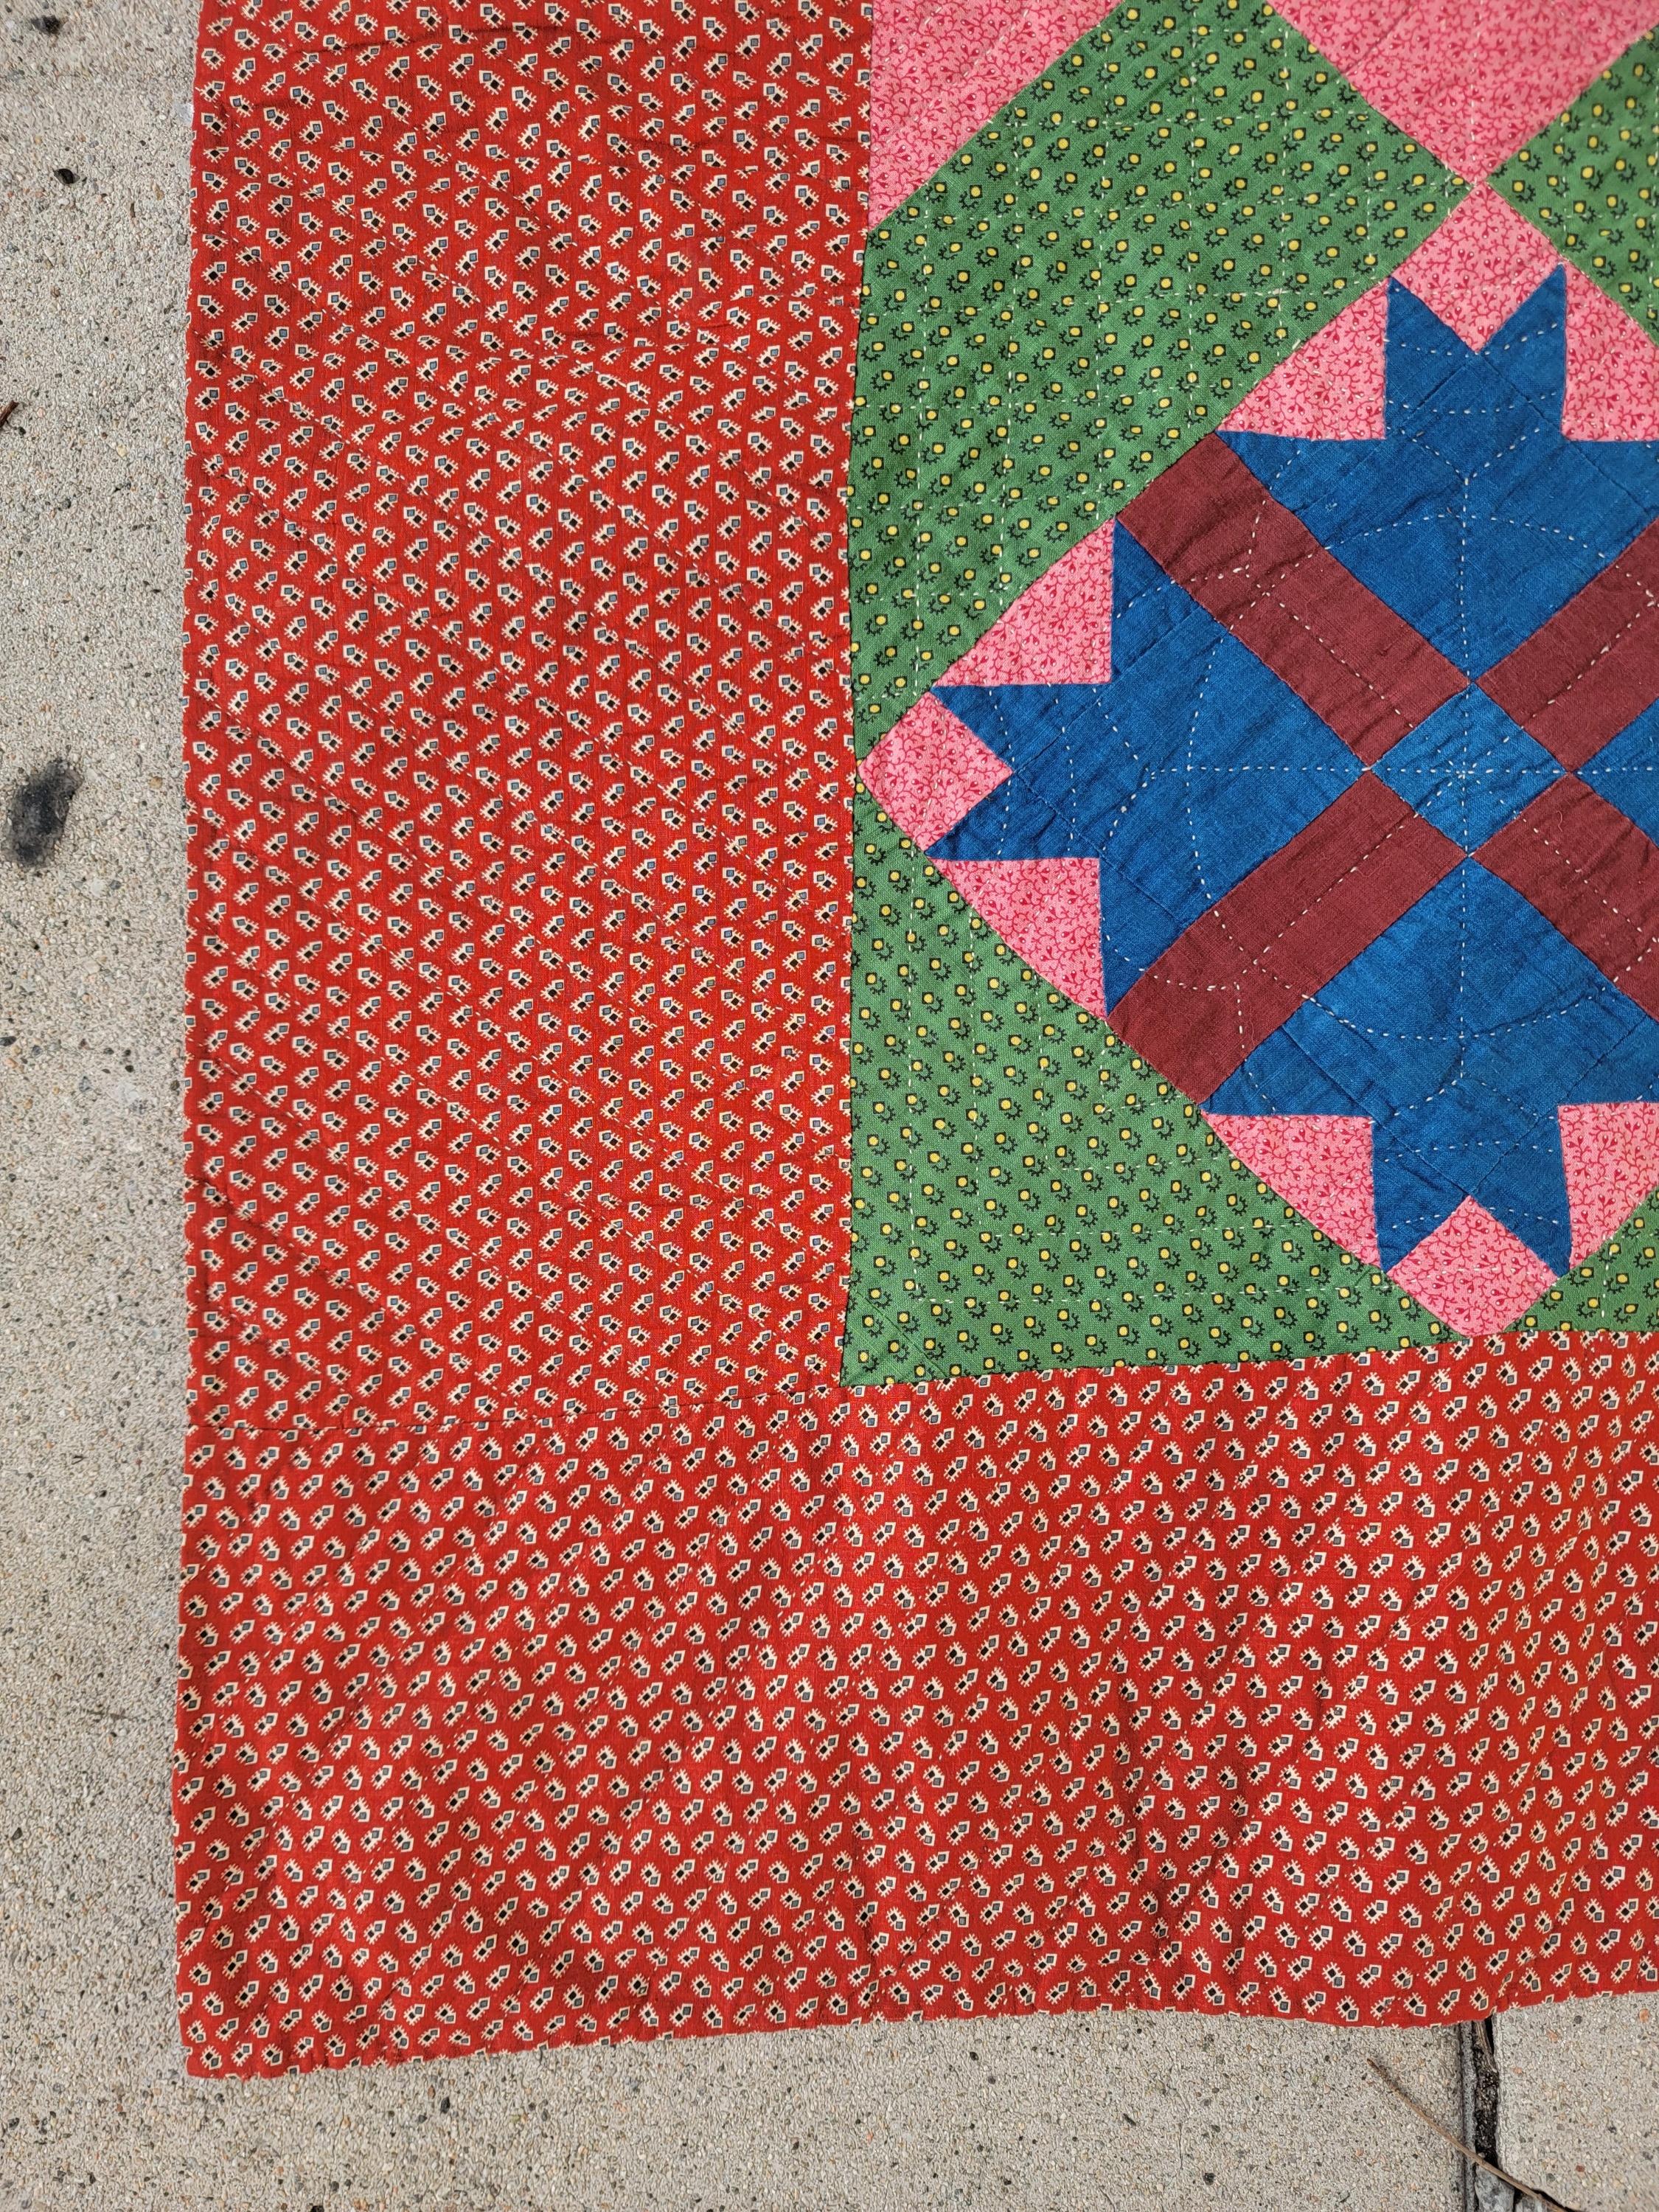 19th century Folky tumbling geometric quilt from Pennsylvania in very good condition. Fine brown calico backing.